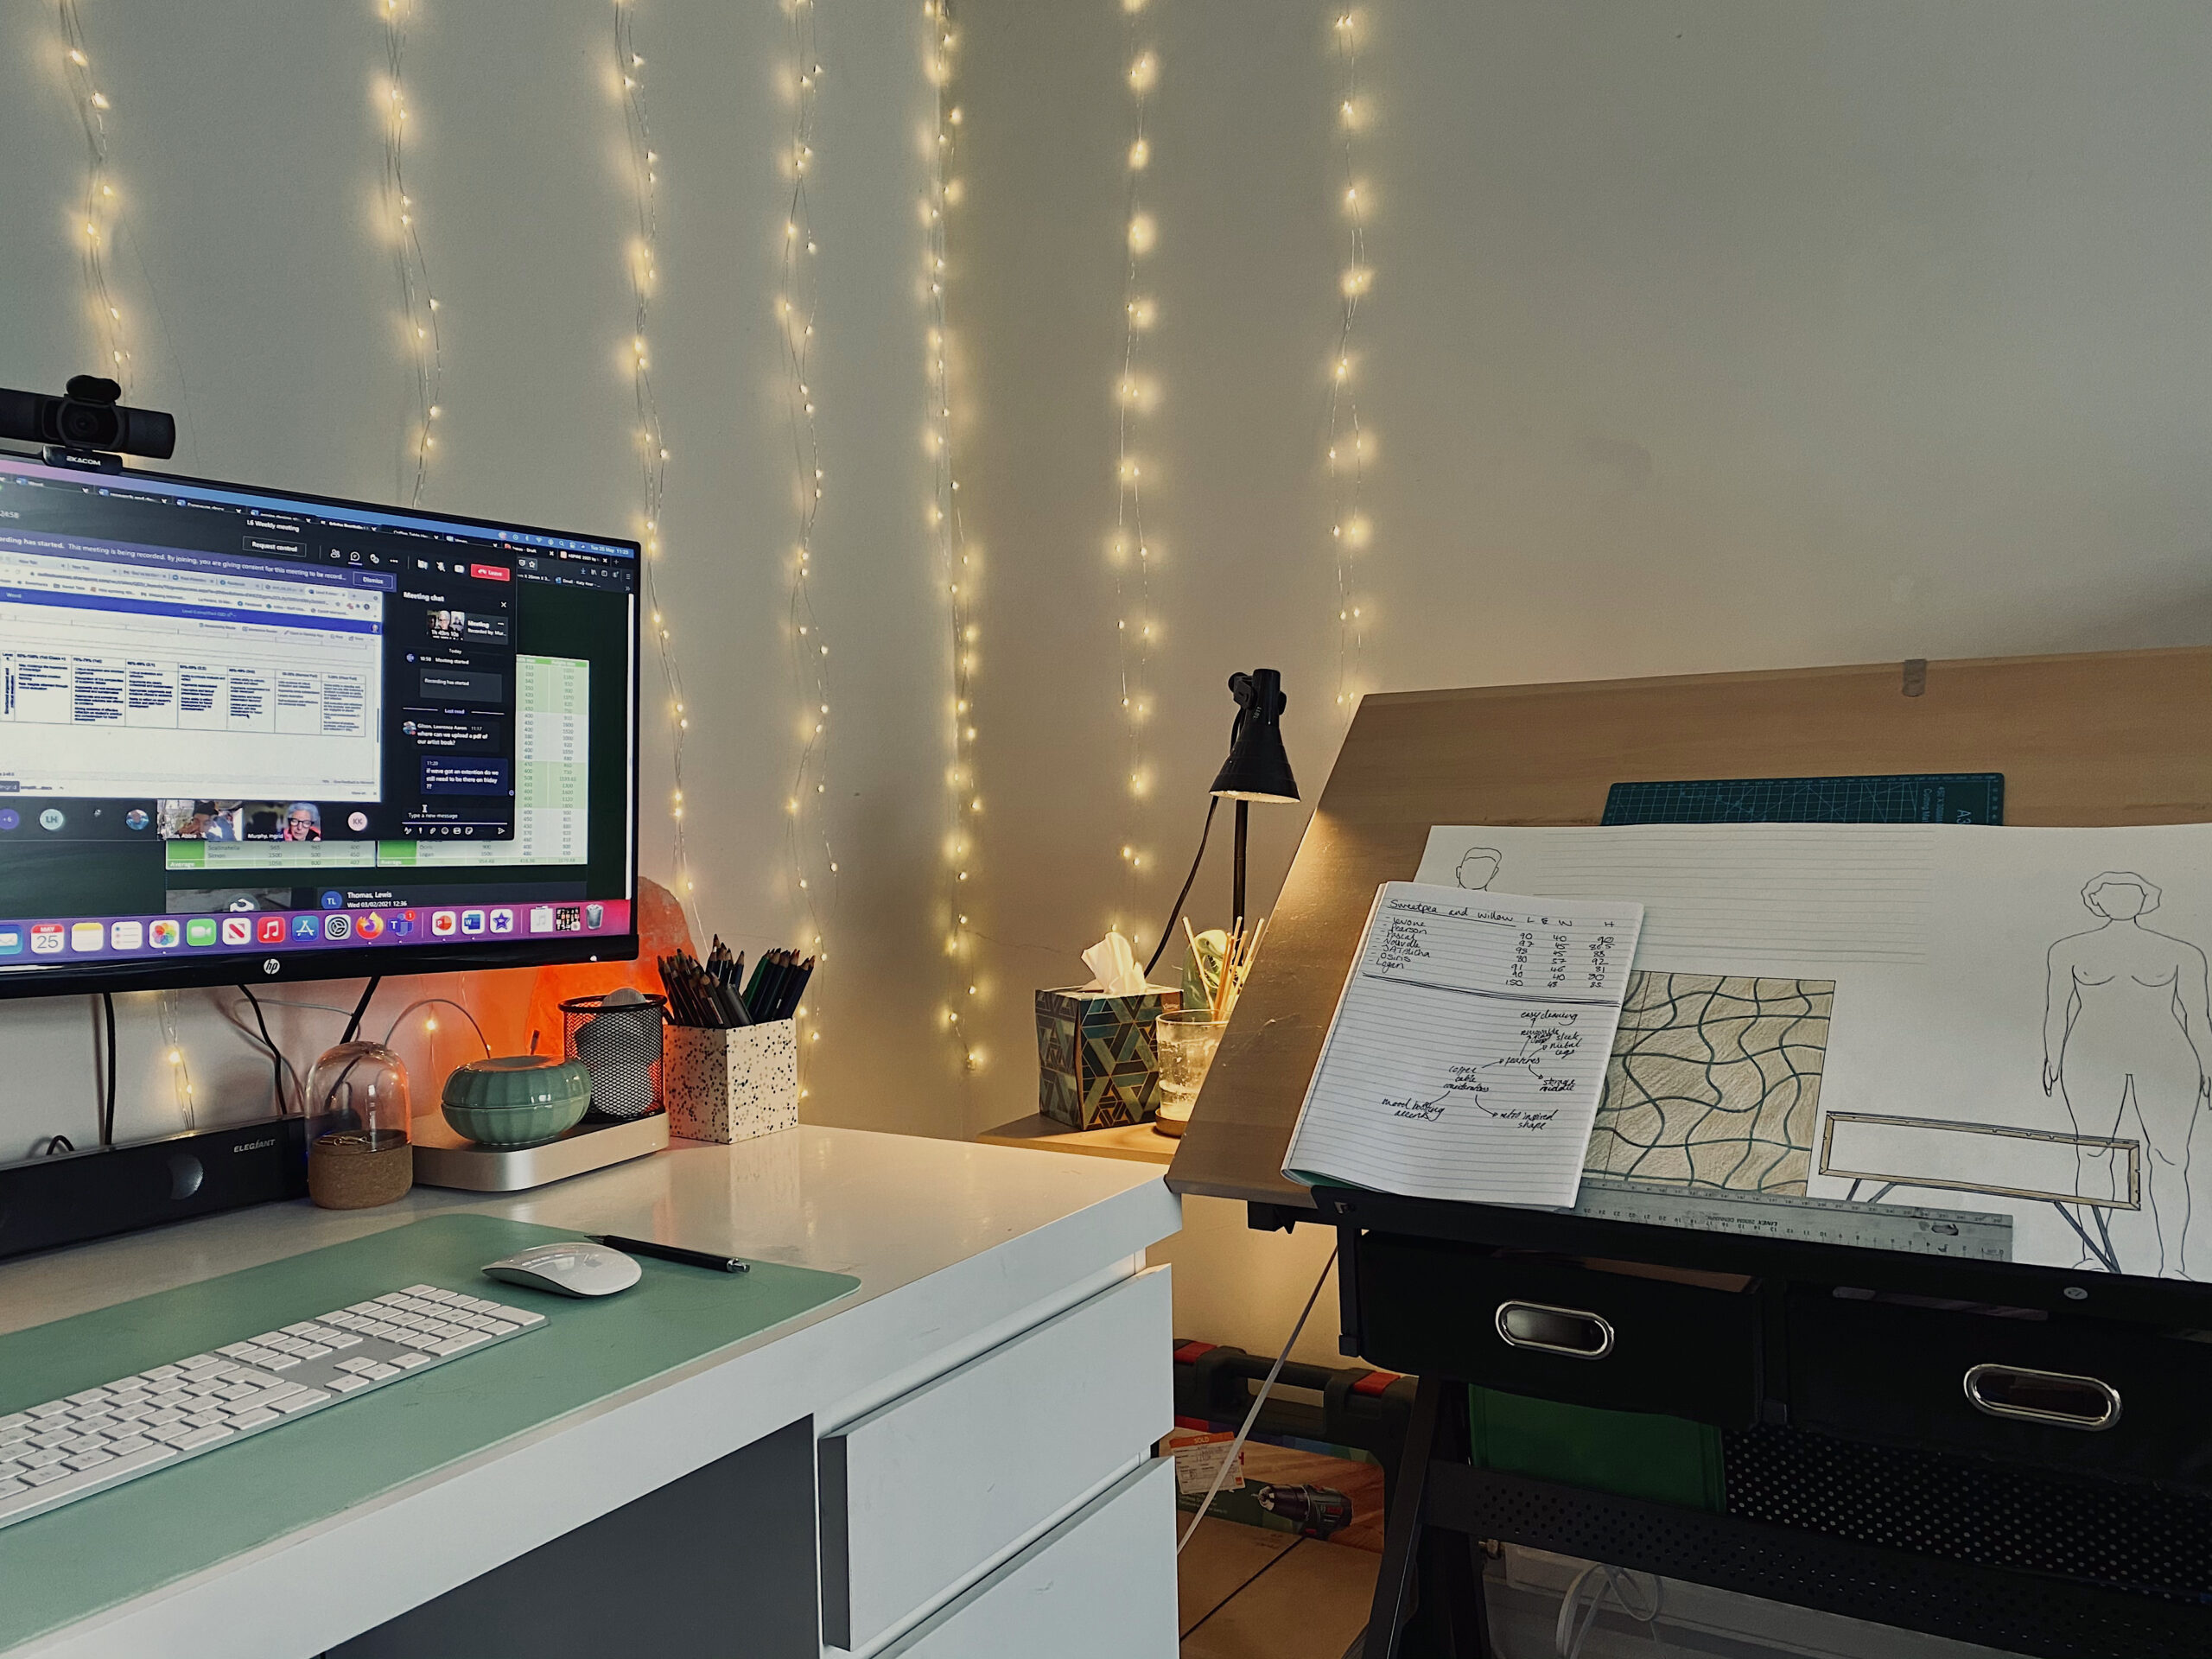 Katy's workspace. A corner of her bedroom with a computer and drawing table